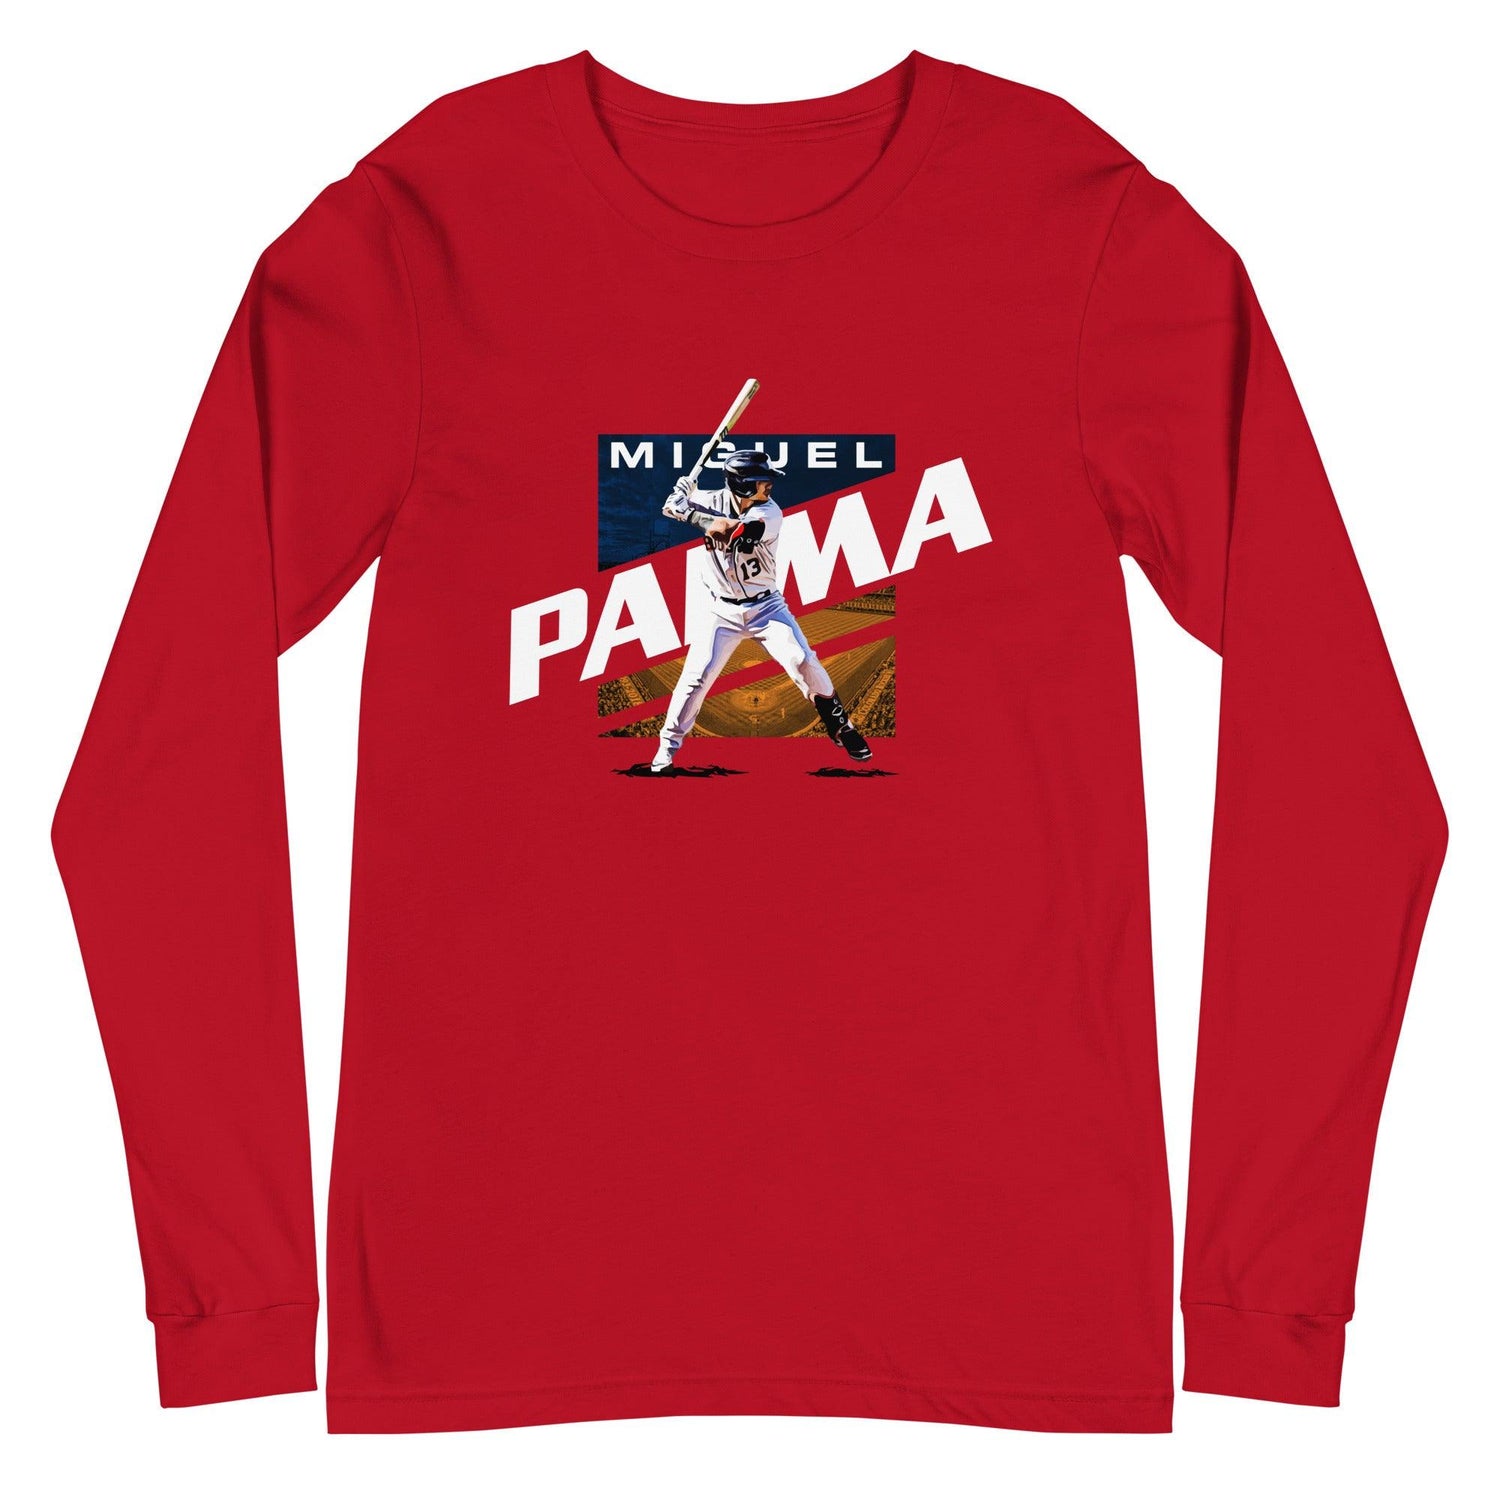 Miguel Palma "Signature" Long Sleeve Tee - Fan Arch